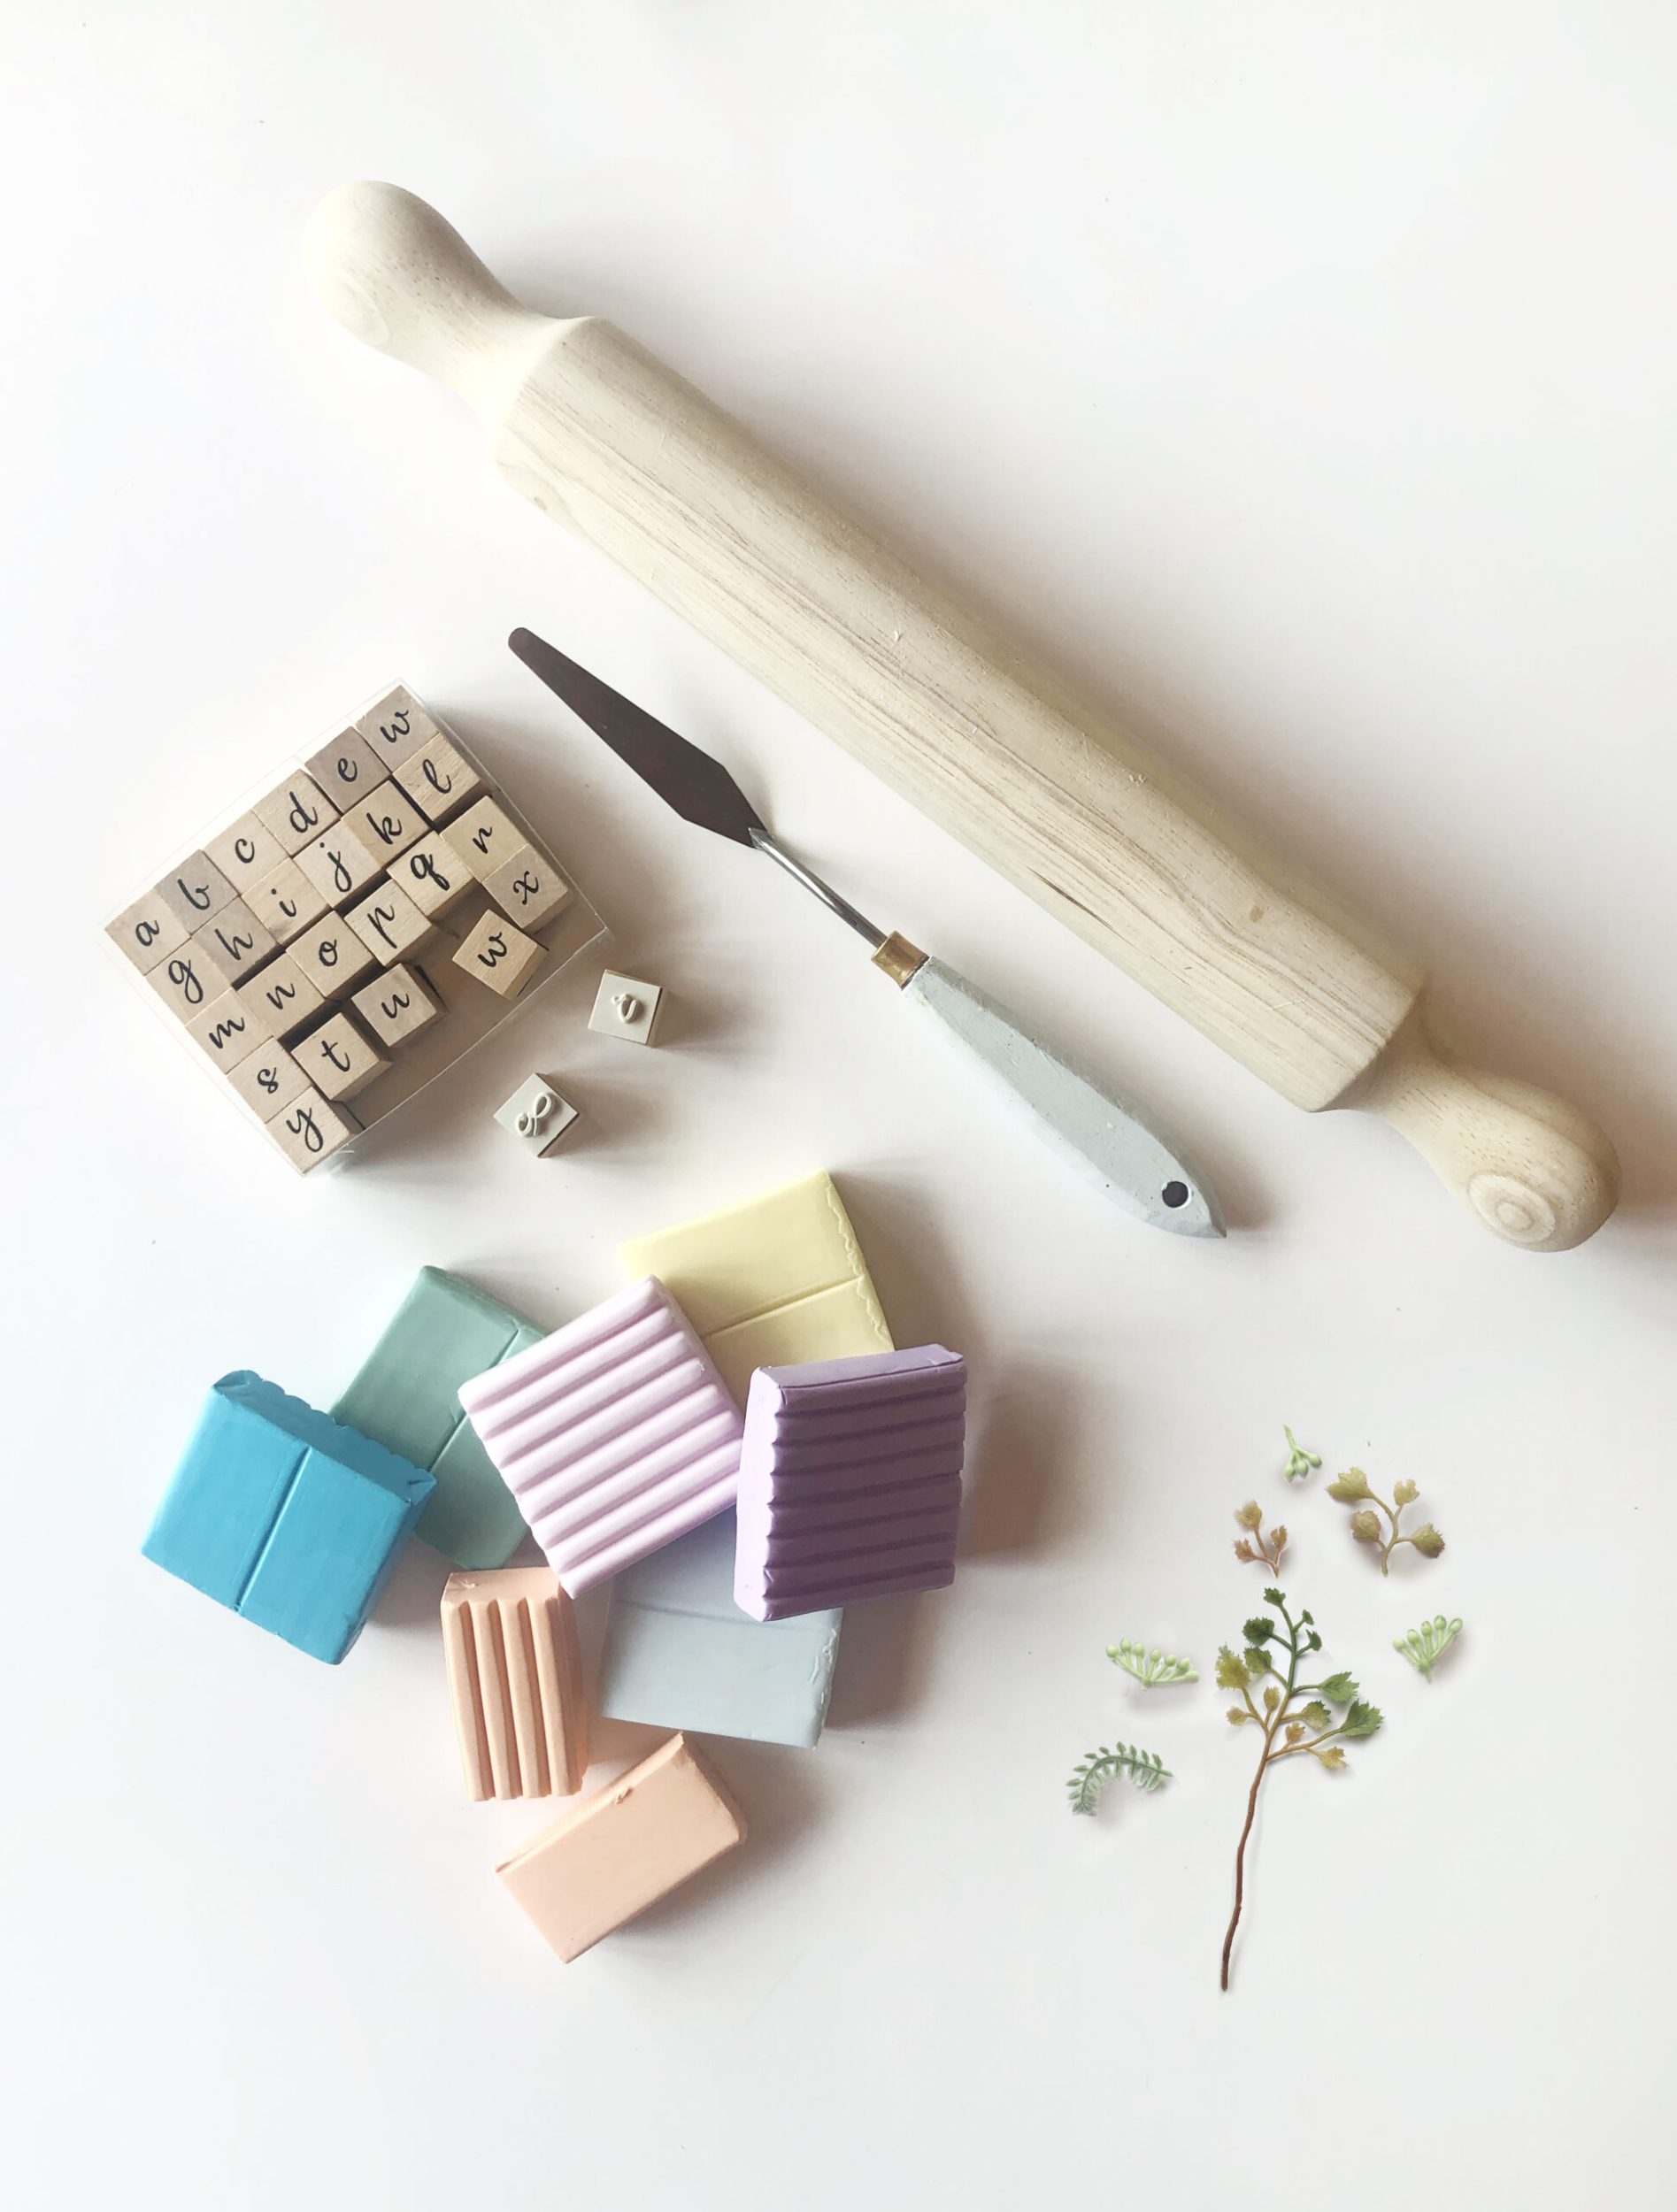 Flay lay of baking clay, alphabet stamps and a rolling pin